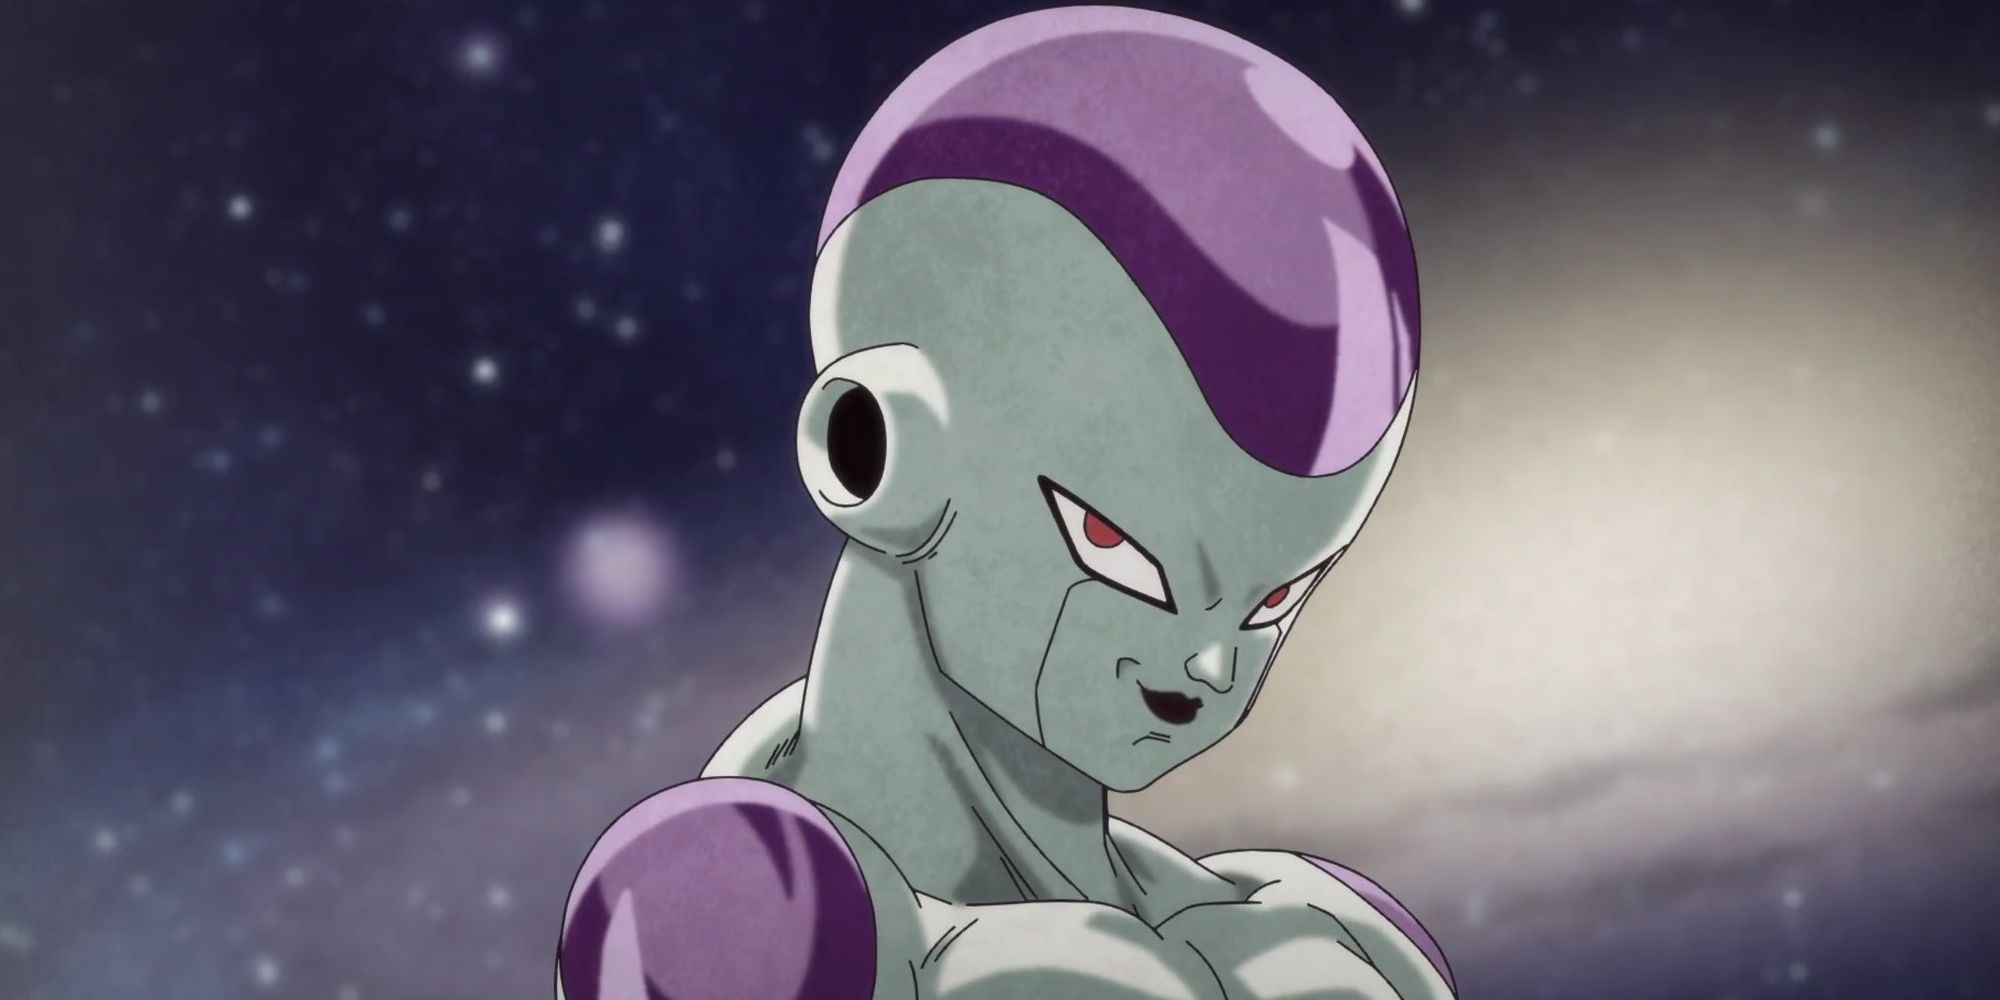 Final Form Frieza during his cameo in Dragon Ball Super: Super Hero